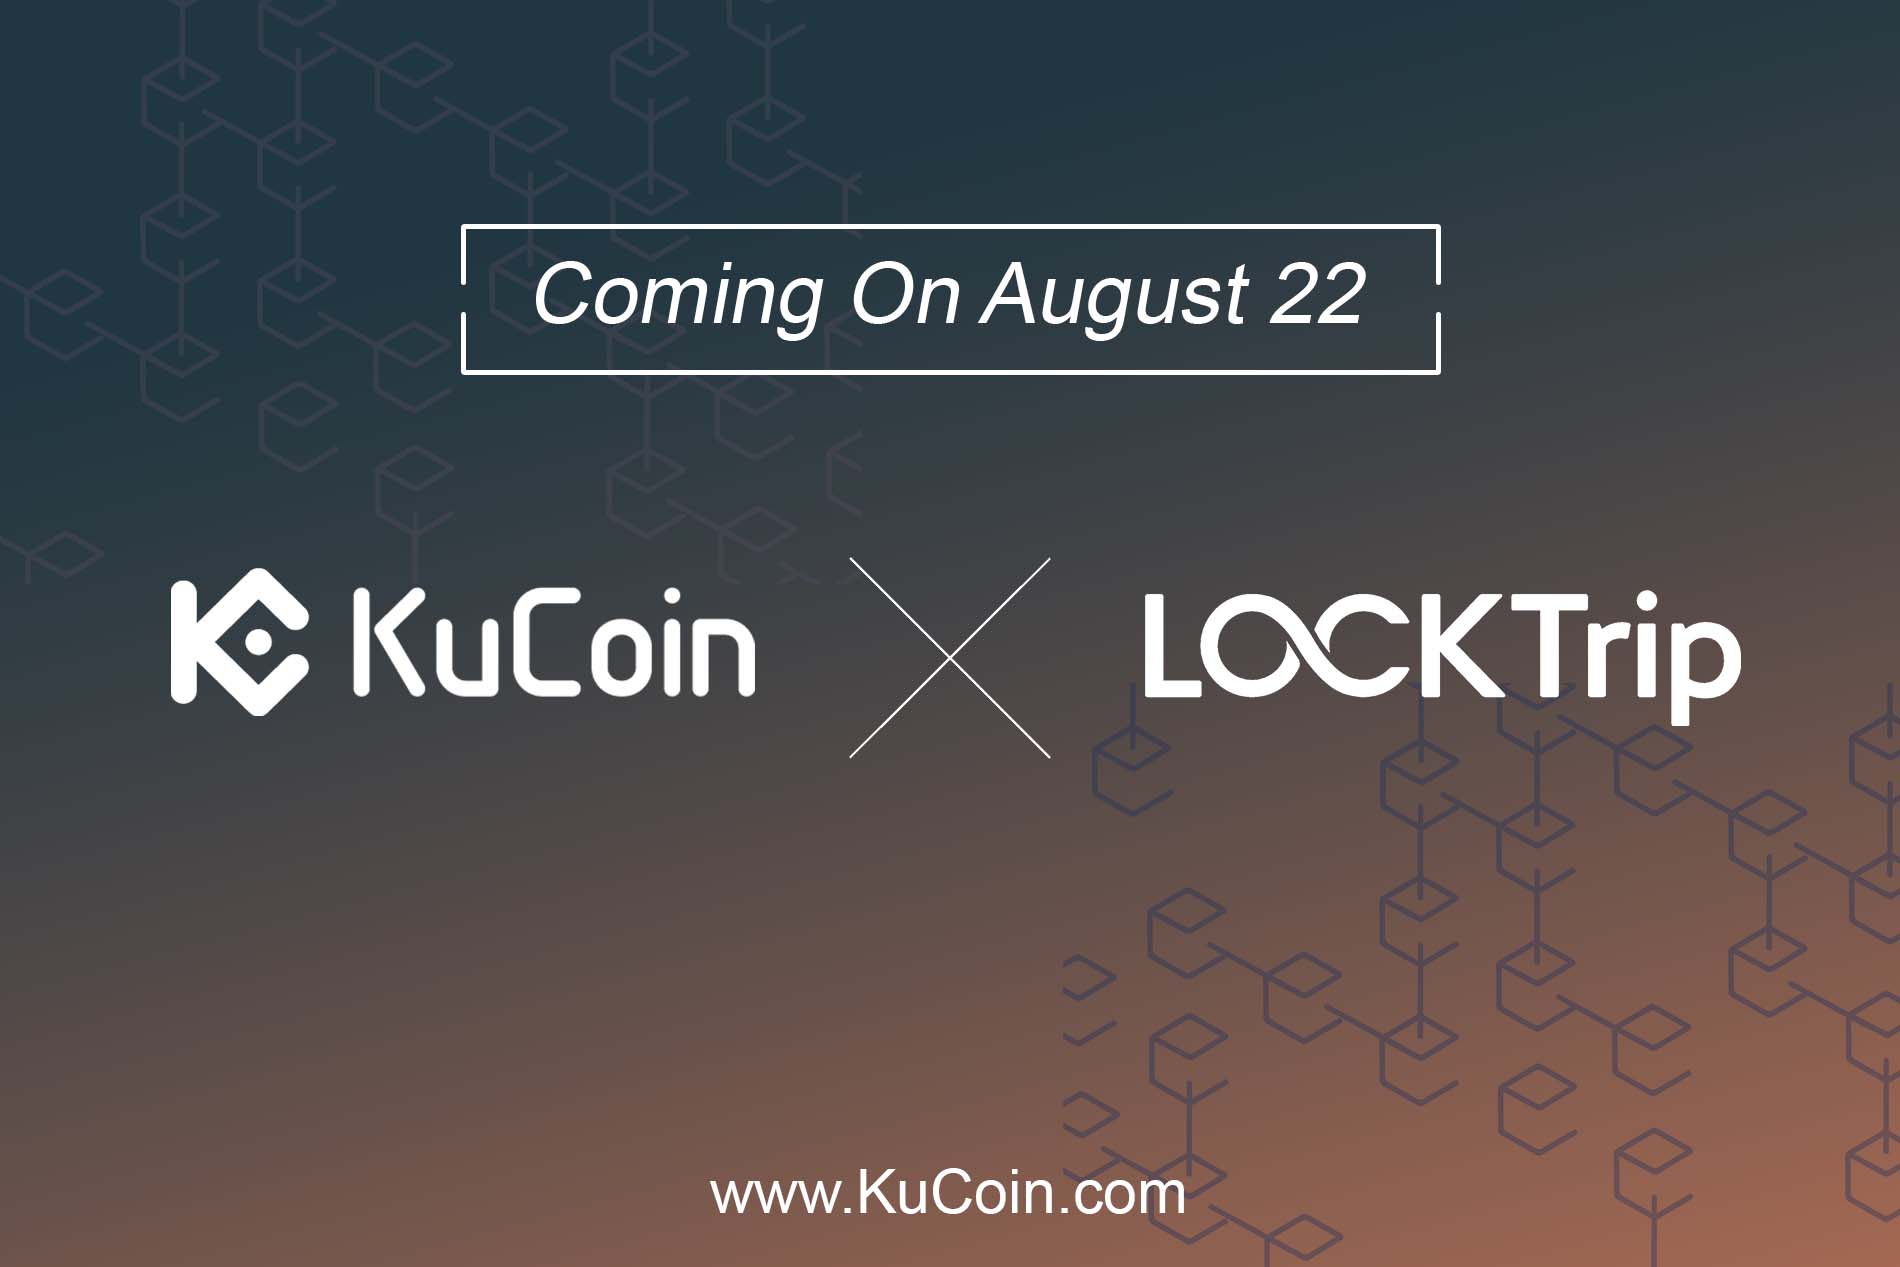 KuCoin Announces Its Listing to the First of Its Kind Platform LockTrip